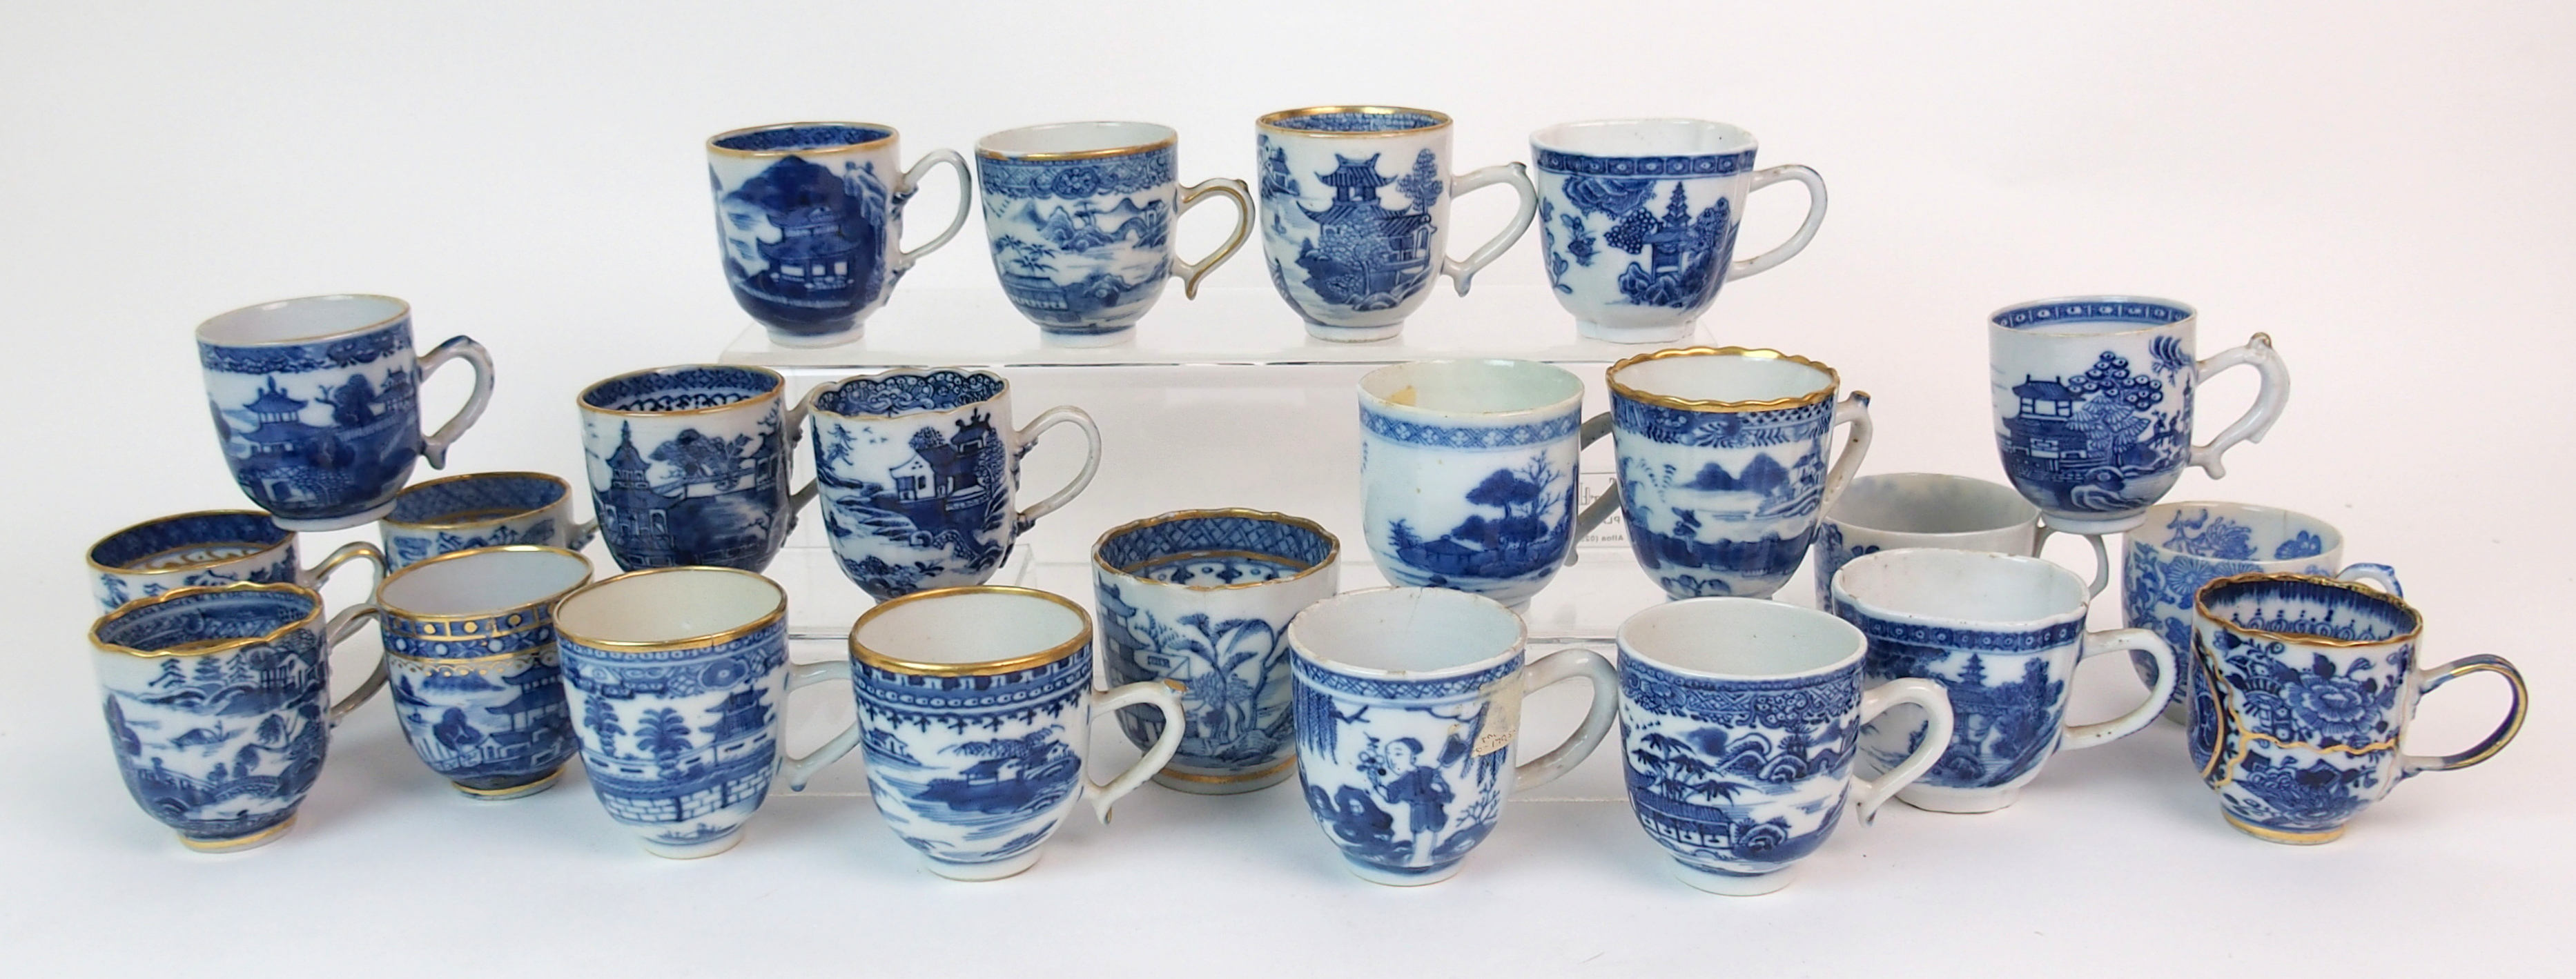 A group of twenty-three Chinese export teacups painted with typical landscapes and gilt rims,